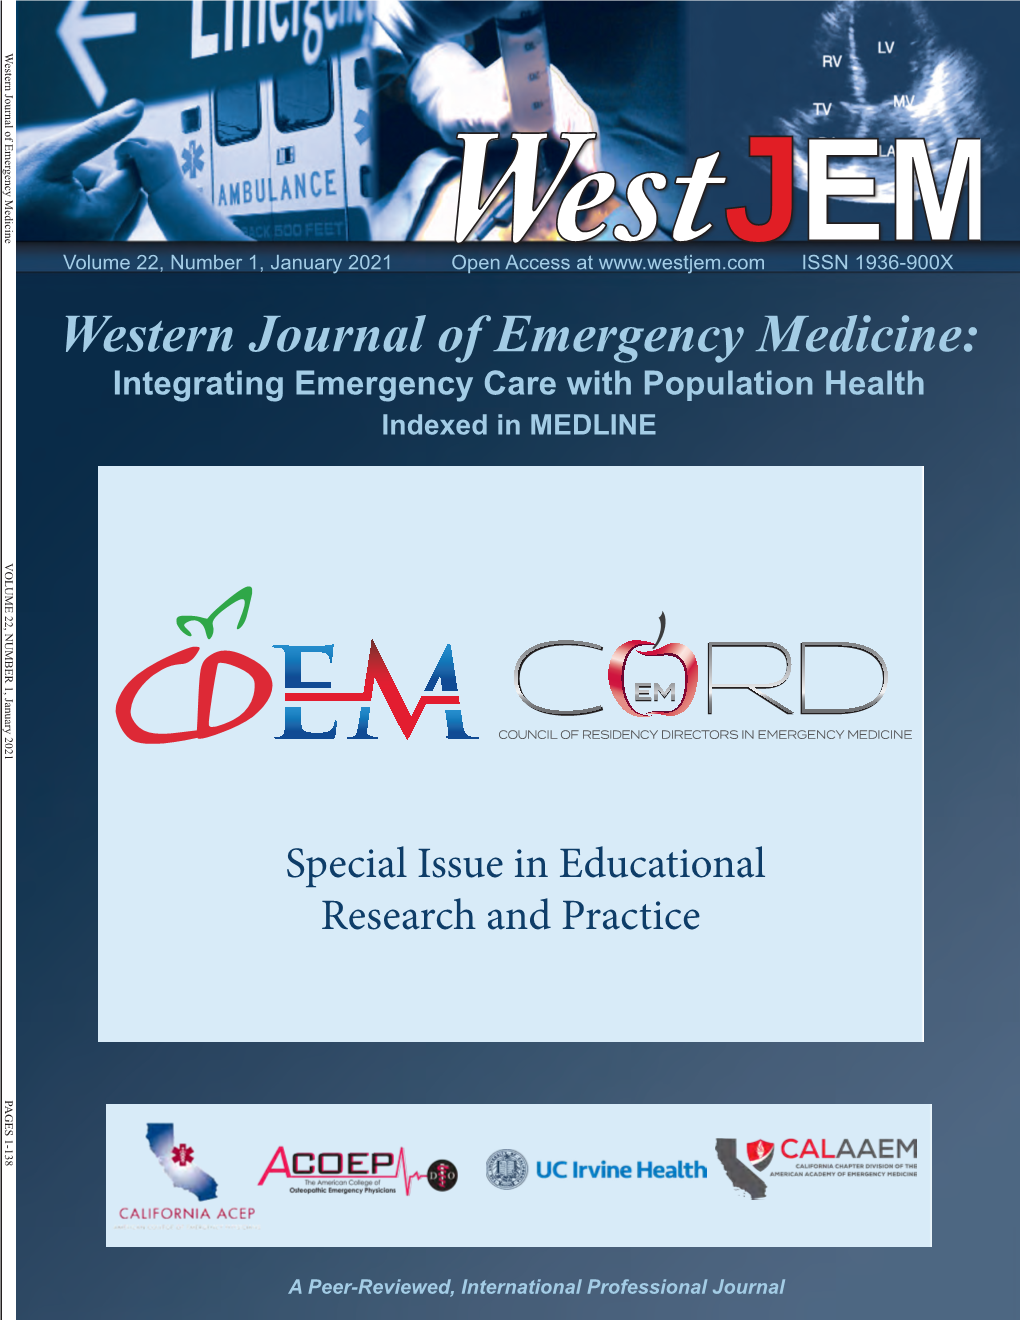 Continued Western Journal of Emergency Medicine